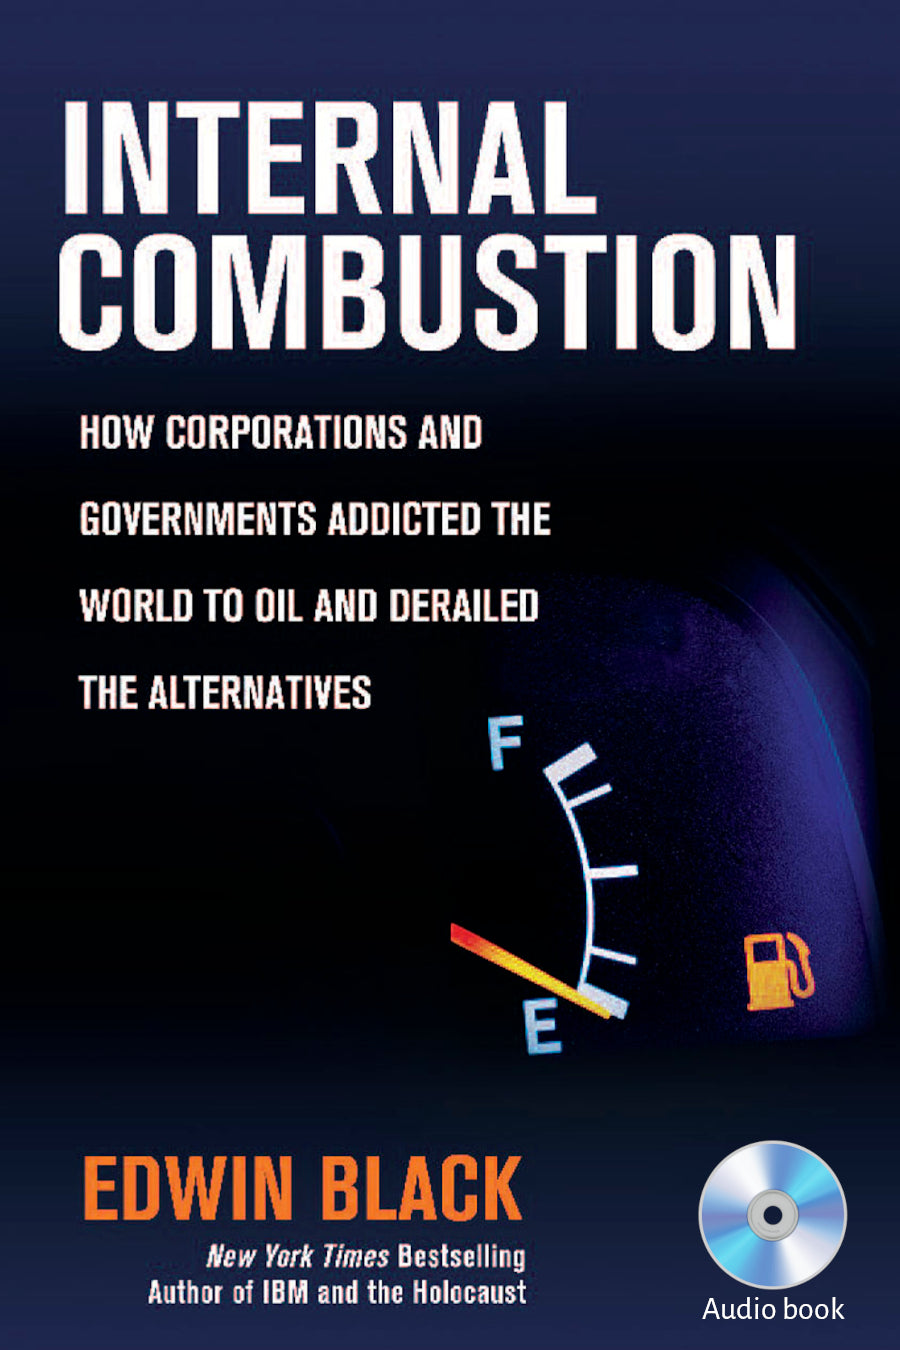 [Audiobook] Internal Combustion: How Corporations and Governments Addicted the World to Oil and Derailed the Alternatives